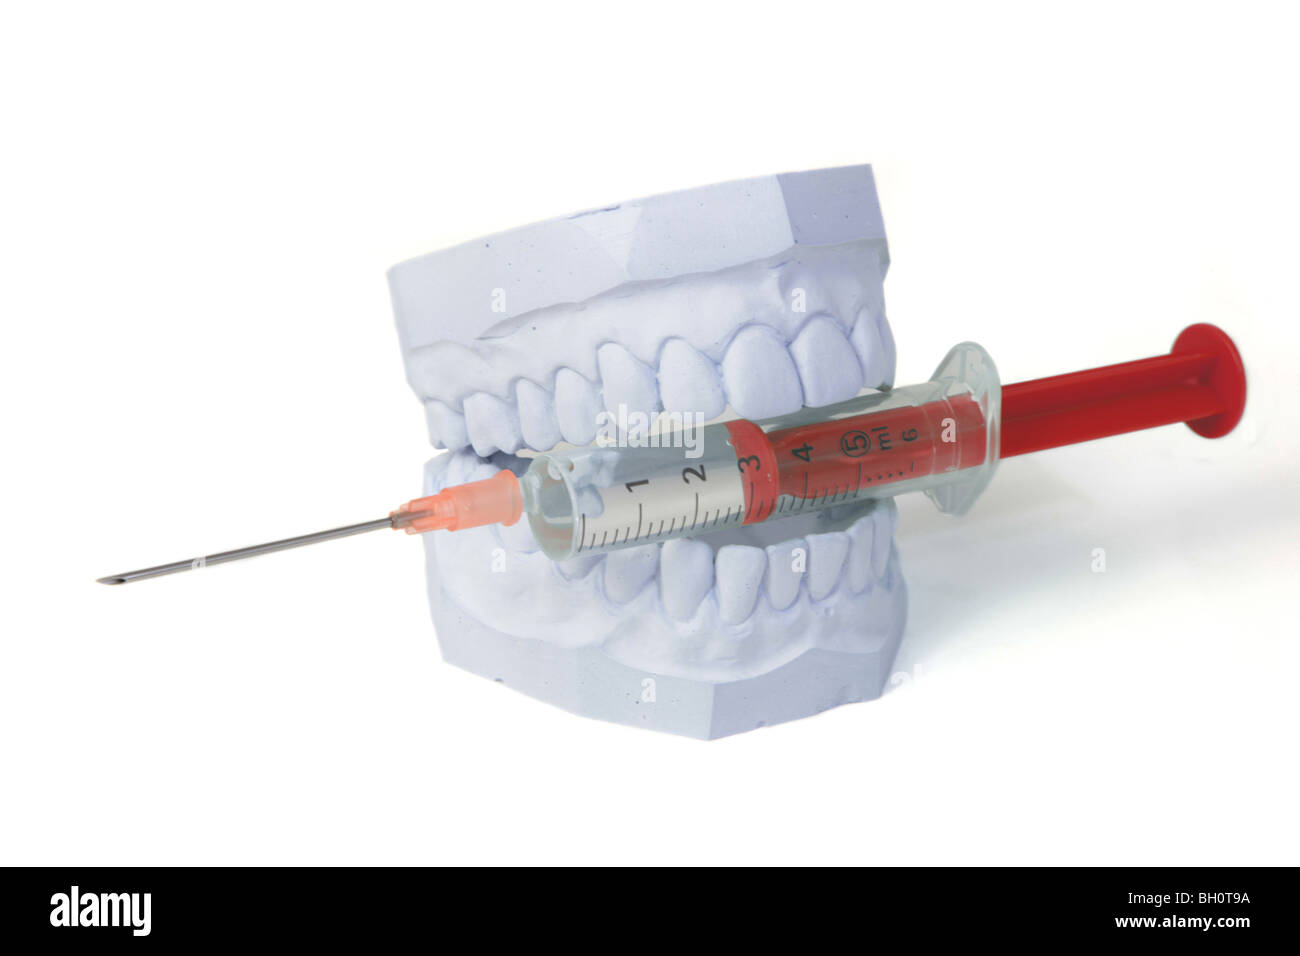 A plaster cast of a set of teeth bites into a syringe. All isolated on white background. Stock Photo